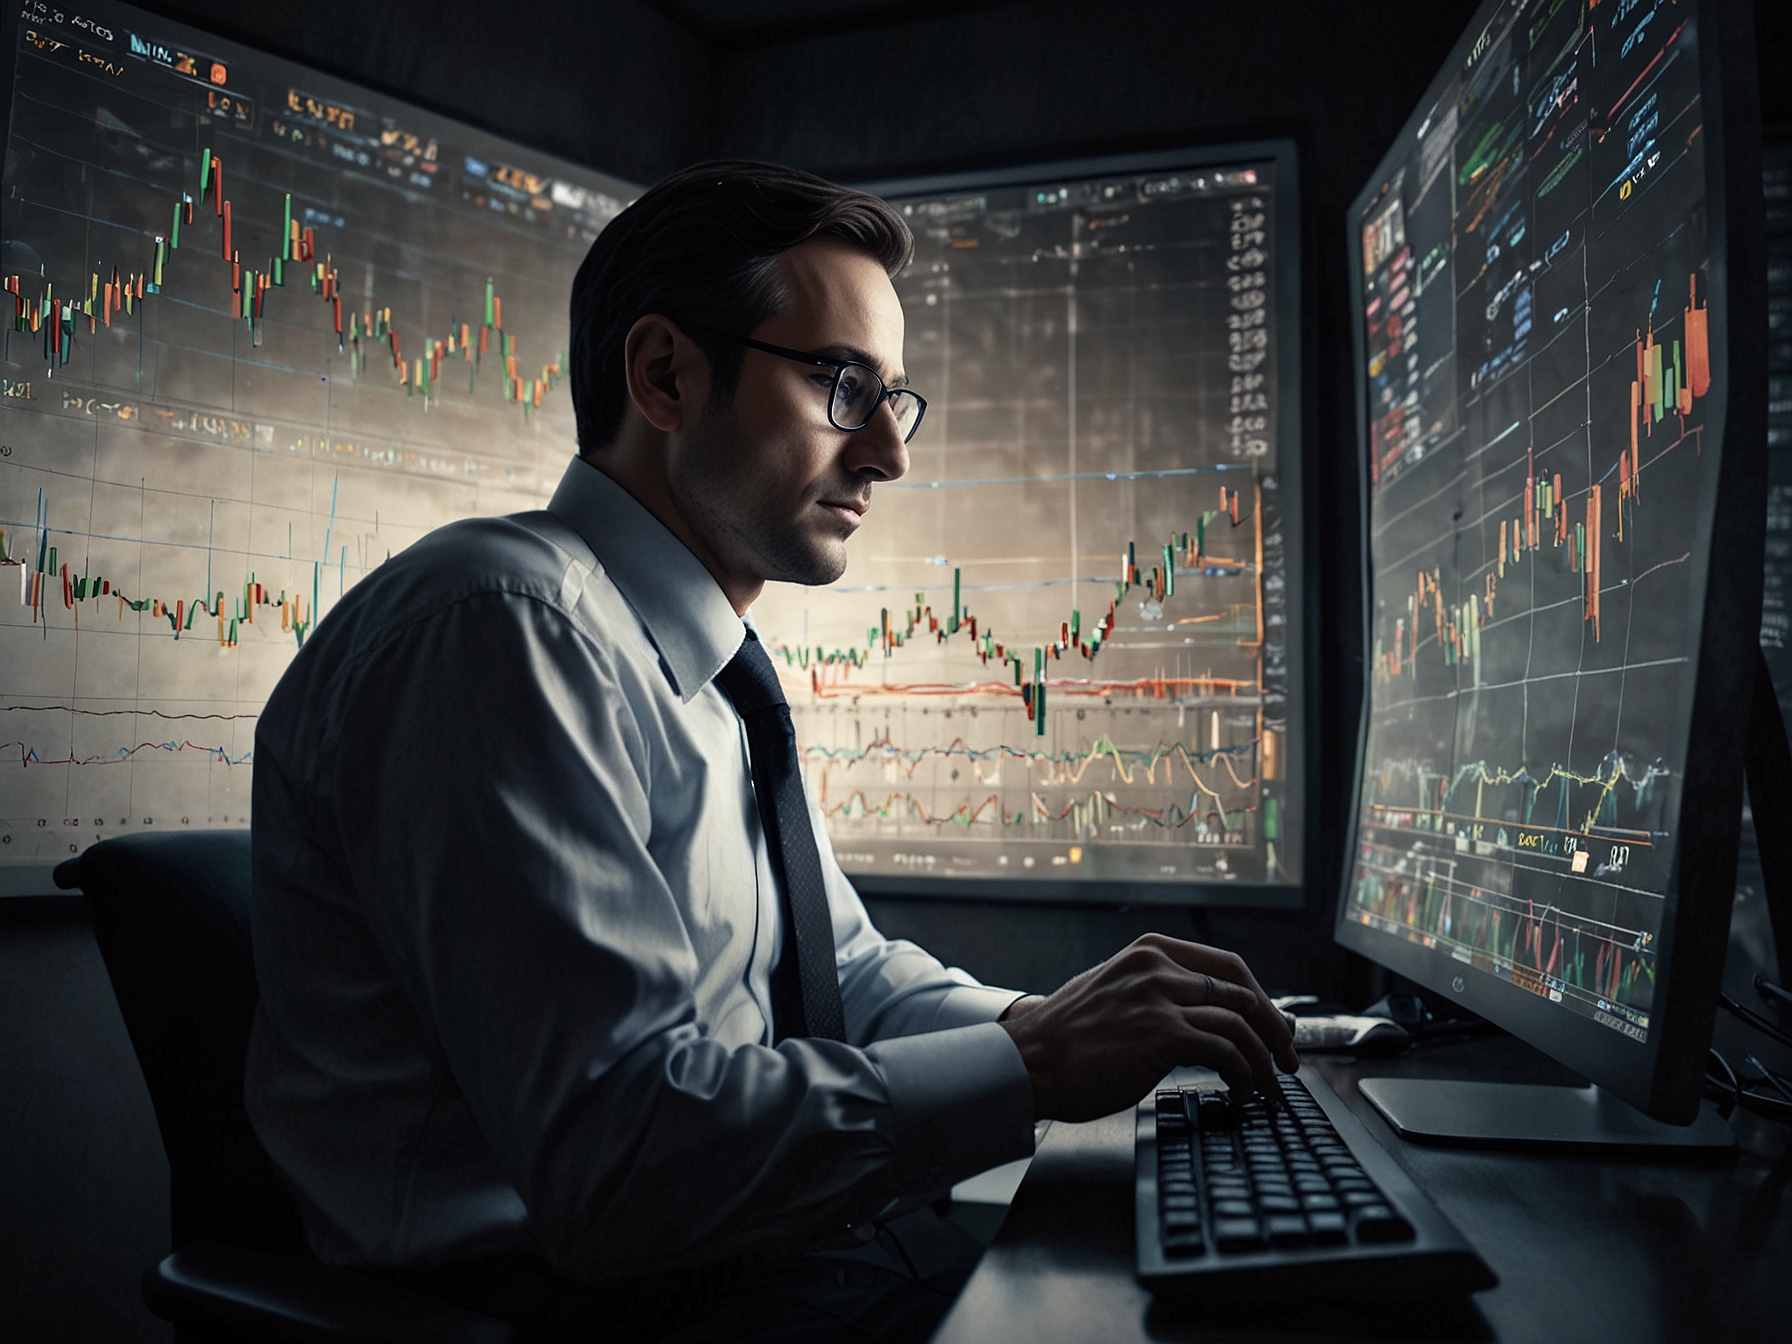 An investor analyzing financial charts and market indicators on a computer, reflecting the careful consideration of IFCI's performance amid market trends and economic factors driving today's stock price dip.